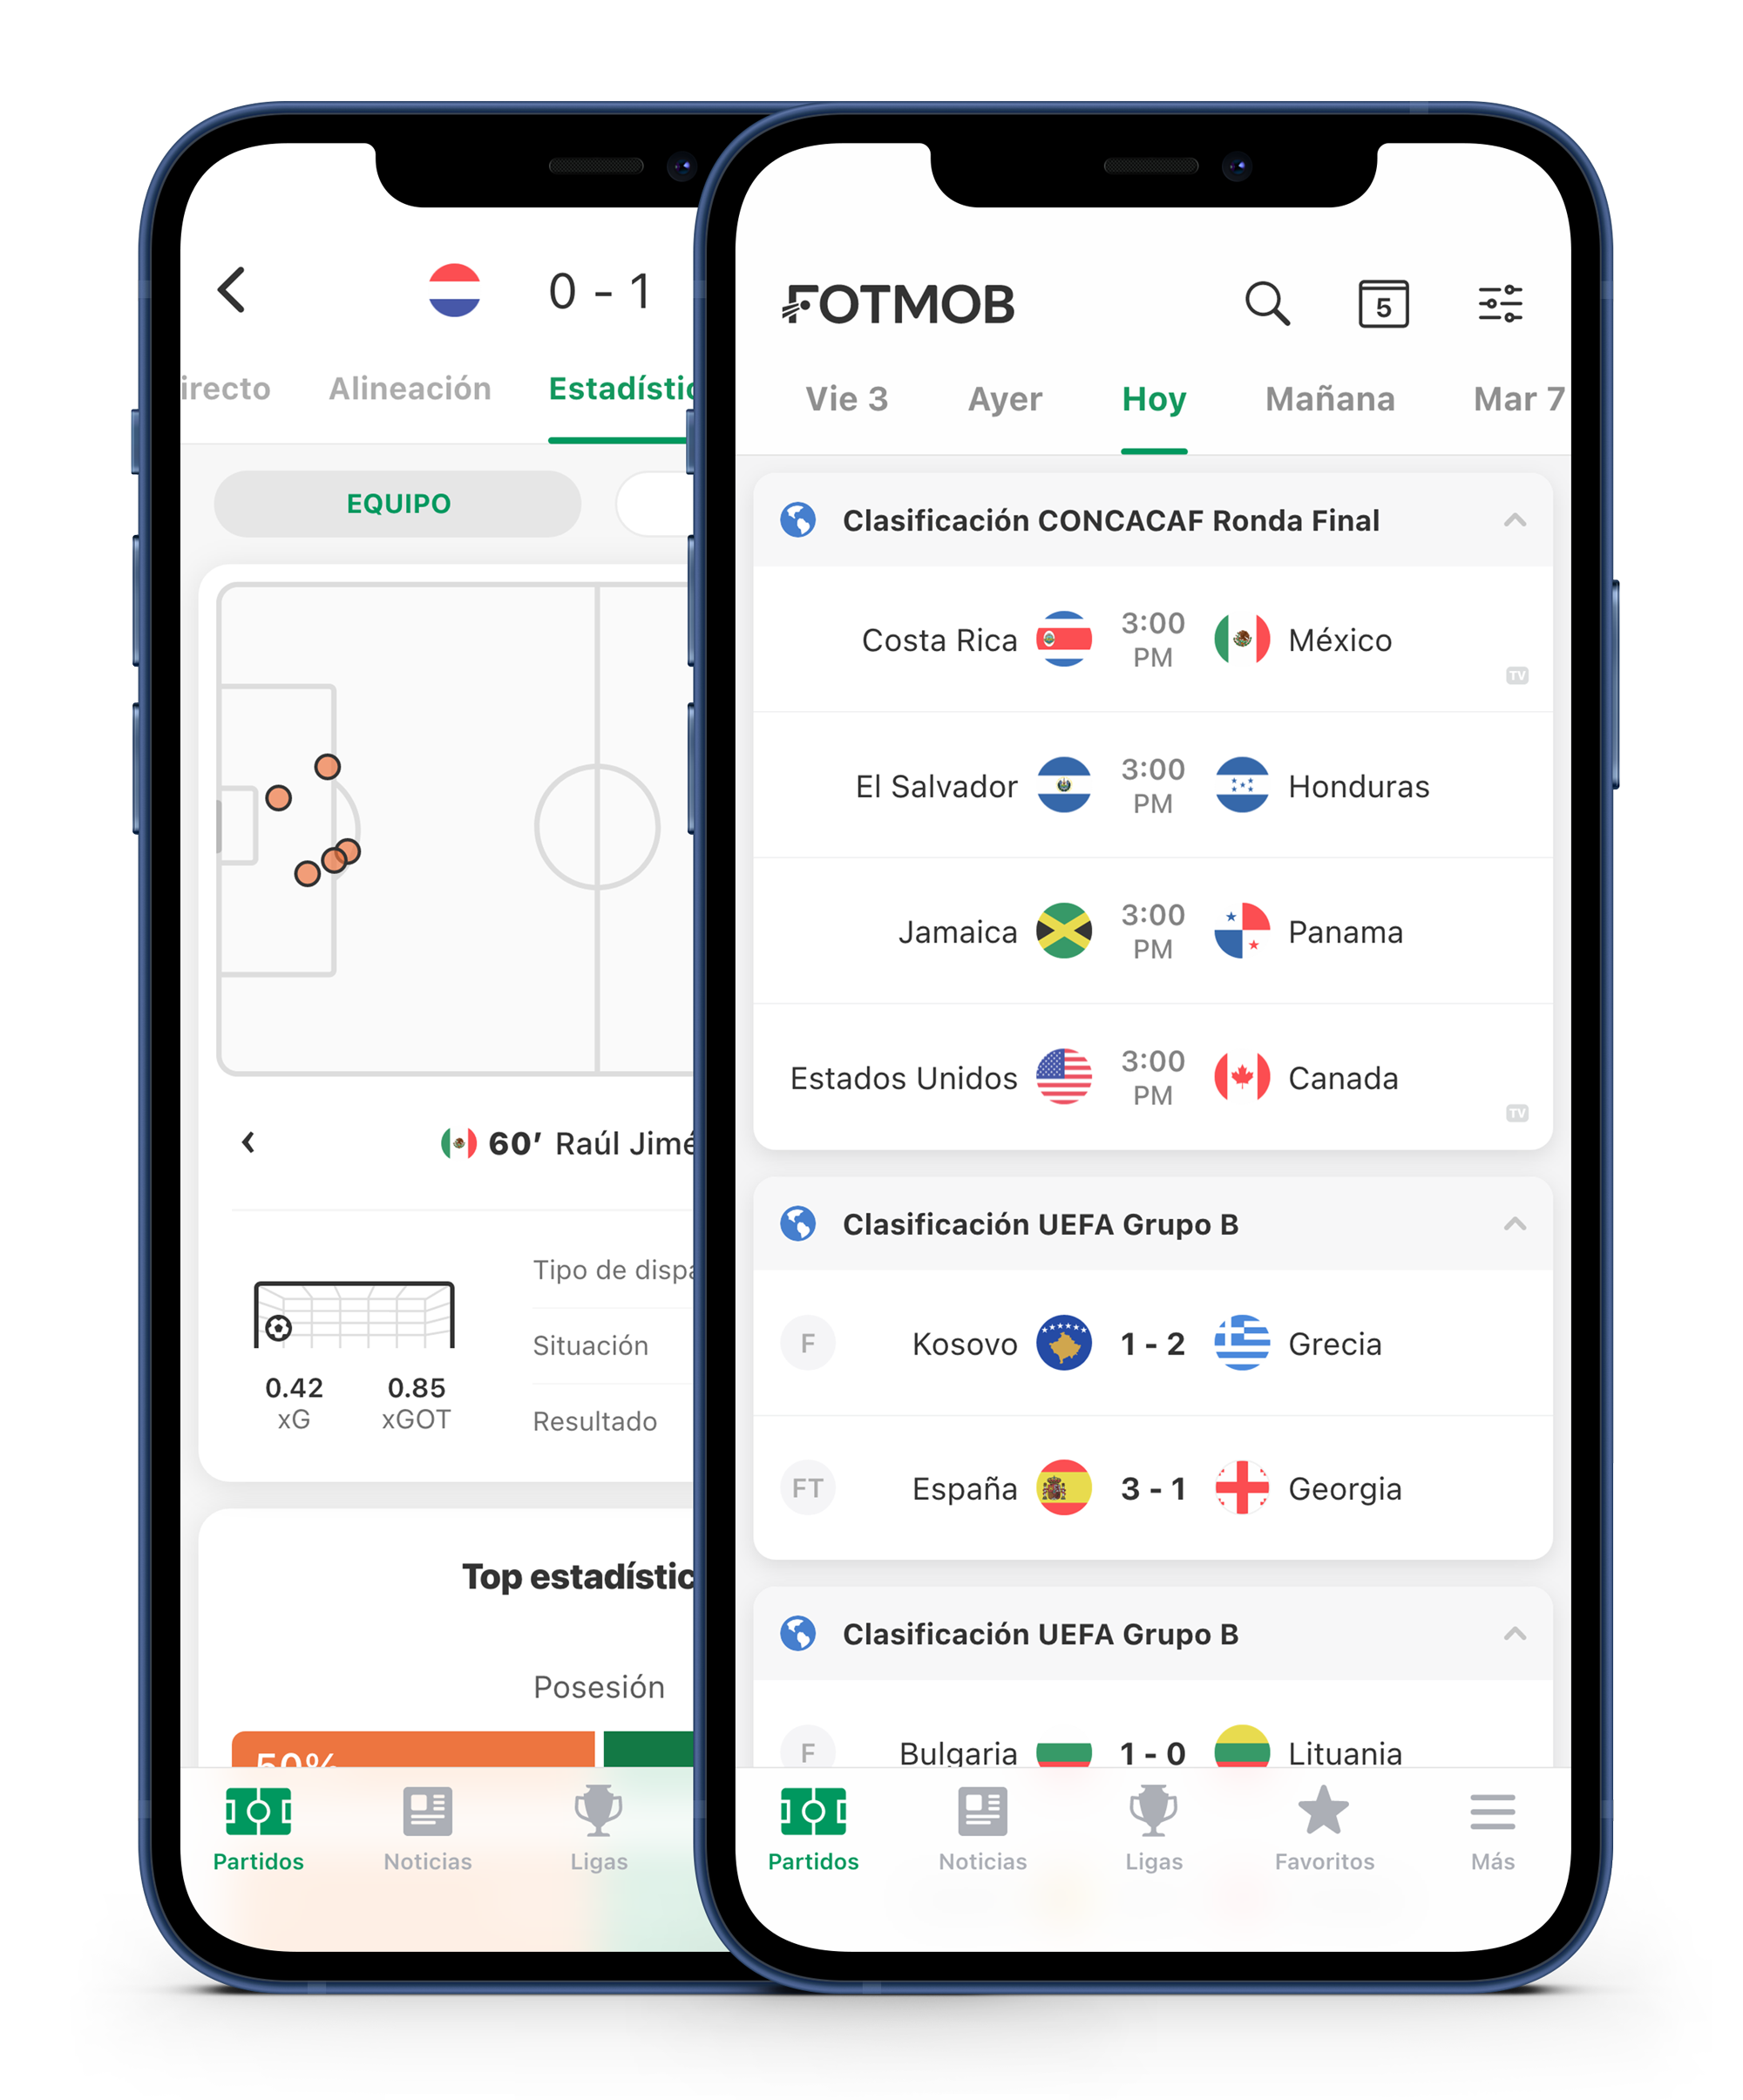 preview of the fotmob app